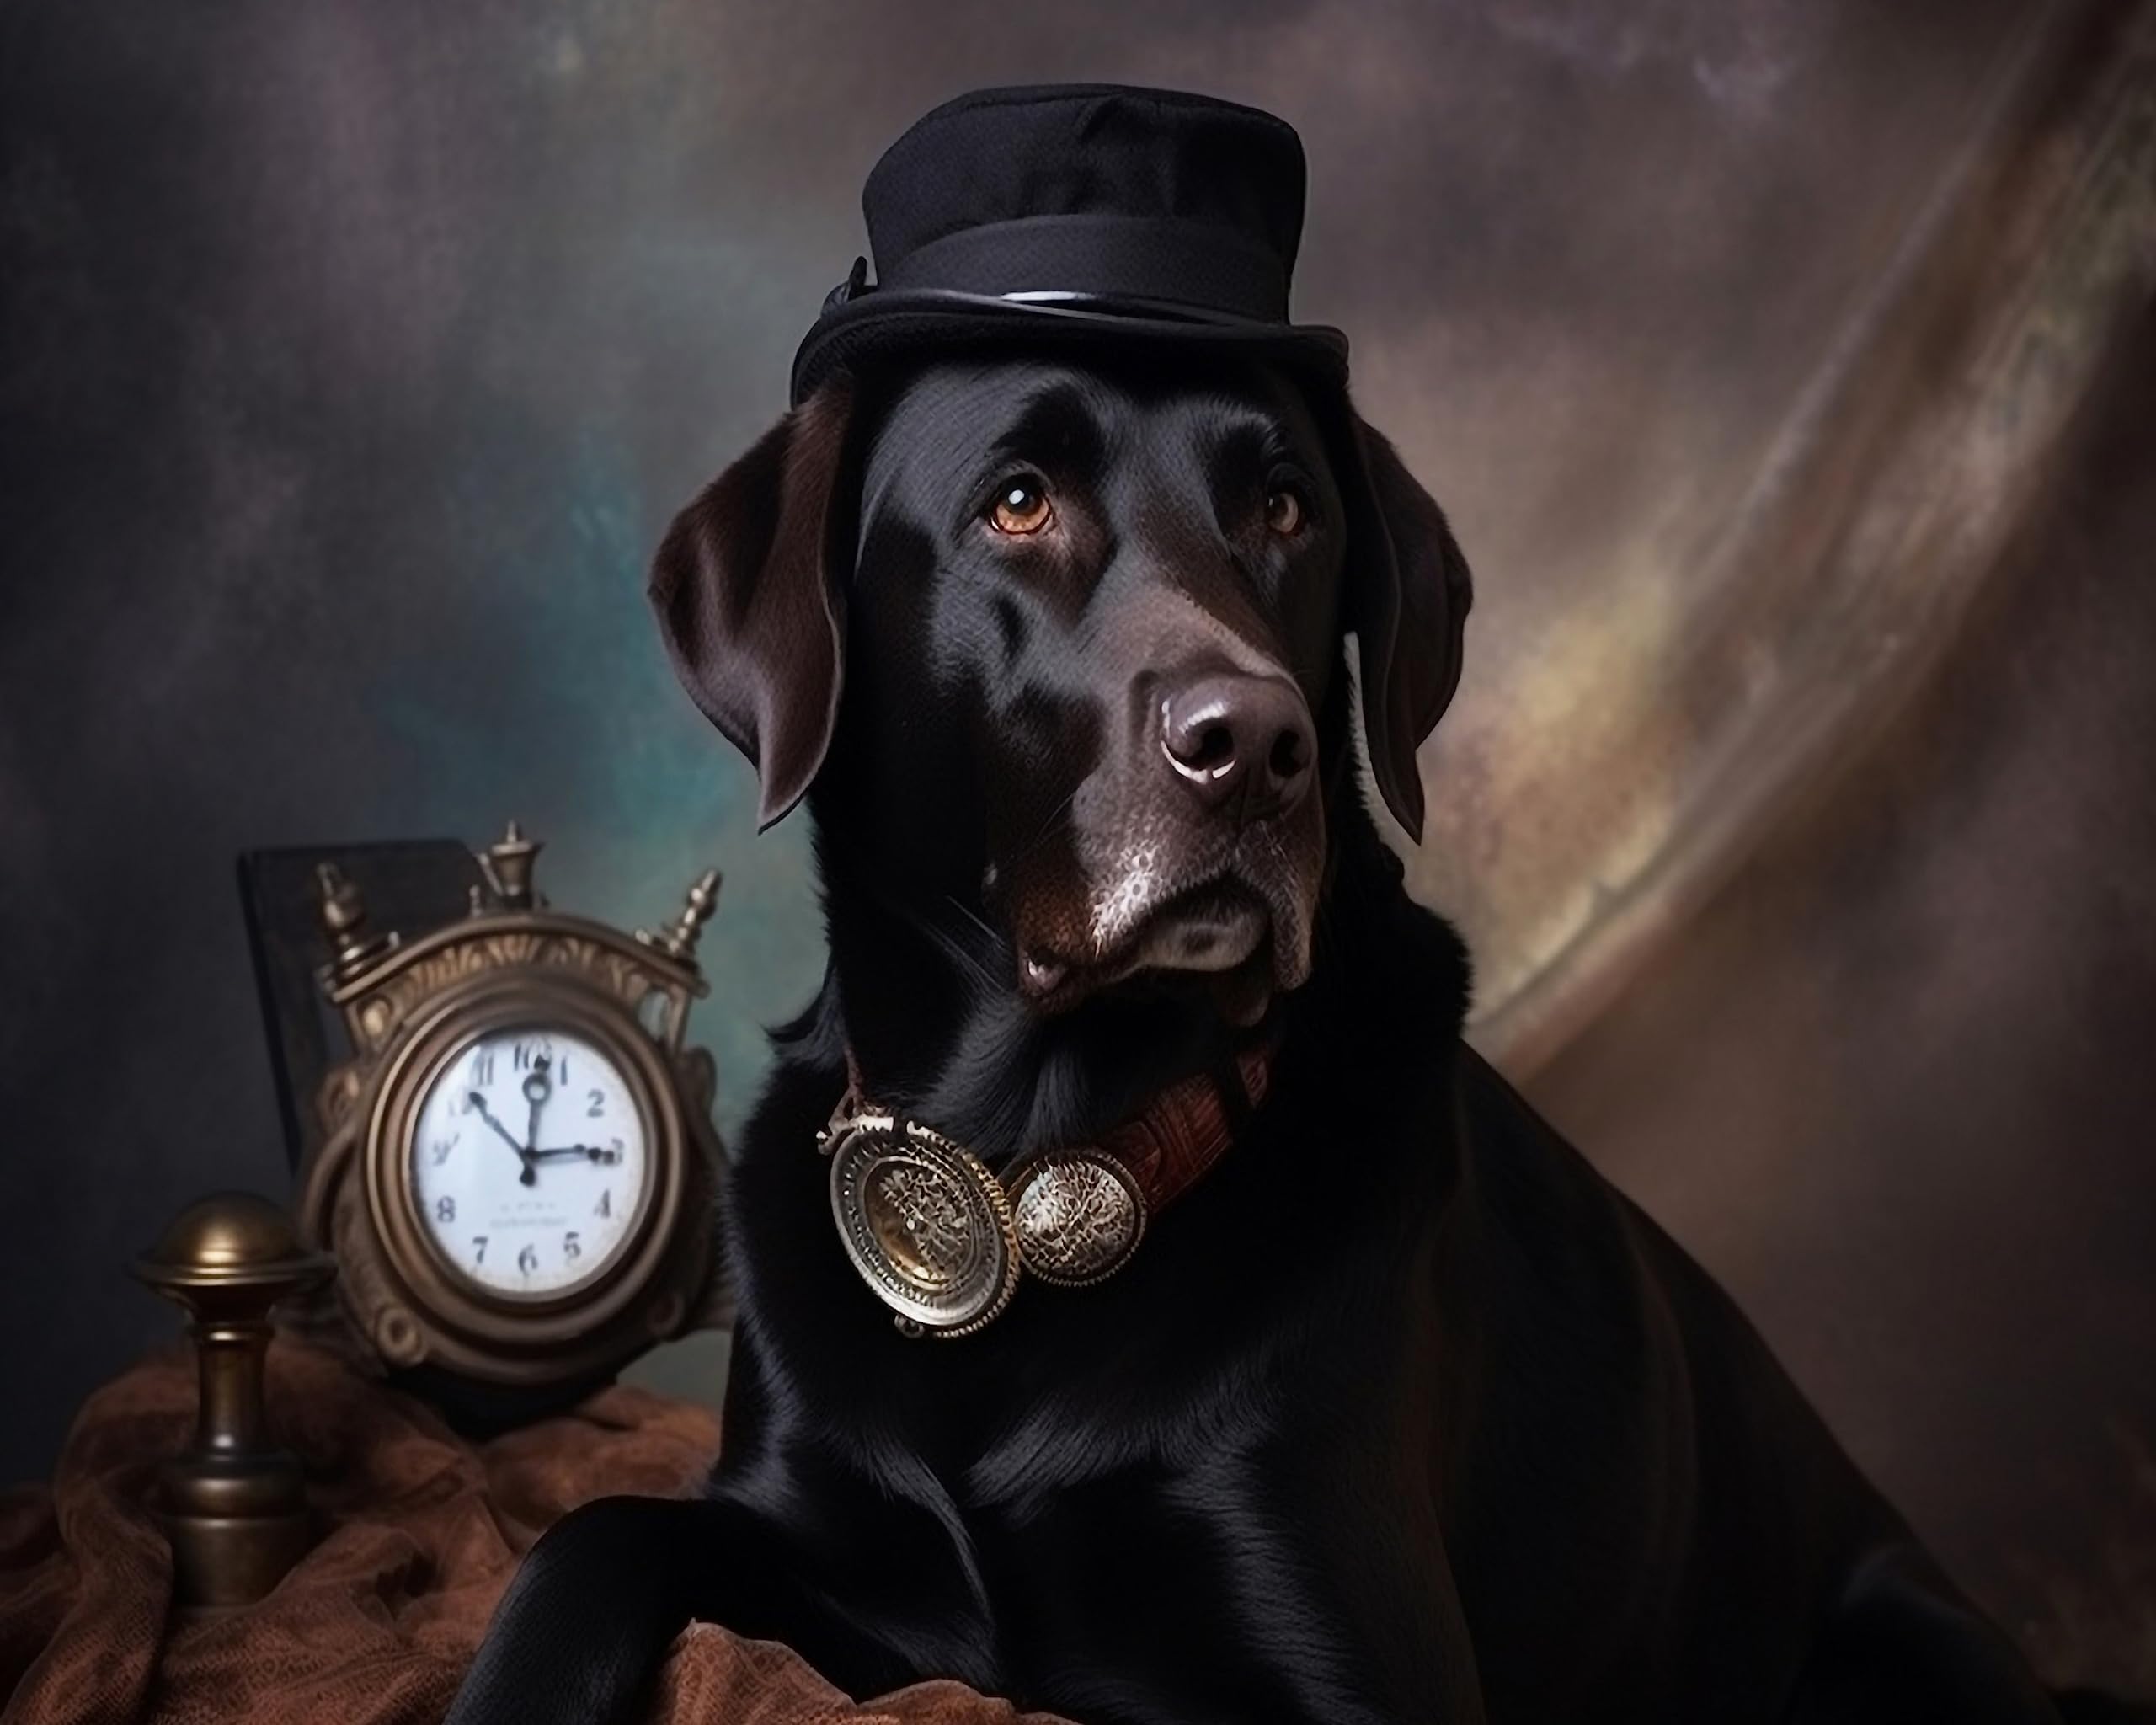 Steampunk Black Labrador, Art Print, Wall Hanging, Animal Poster Picture, Fantasy Anthropomorphic, Curious Arts Gift (8 x 10)